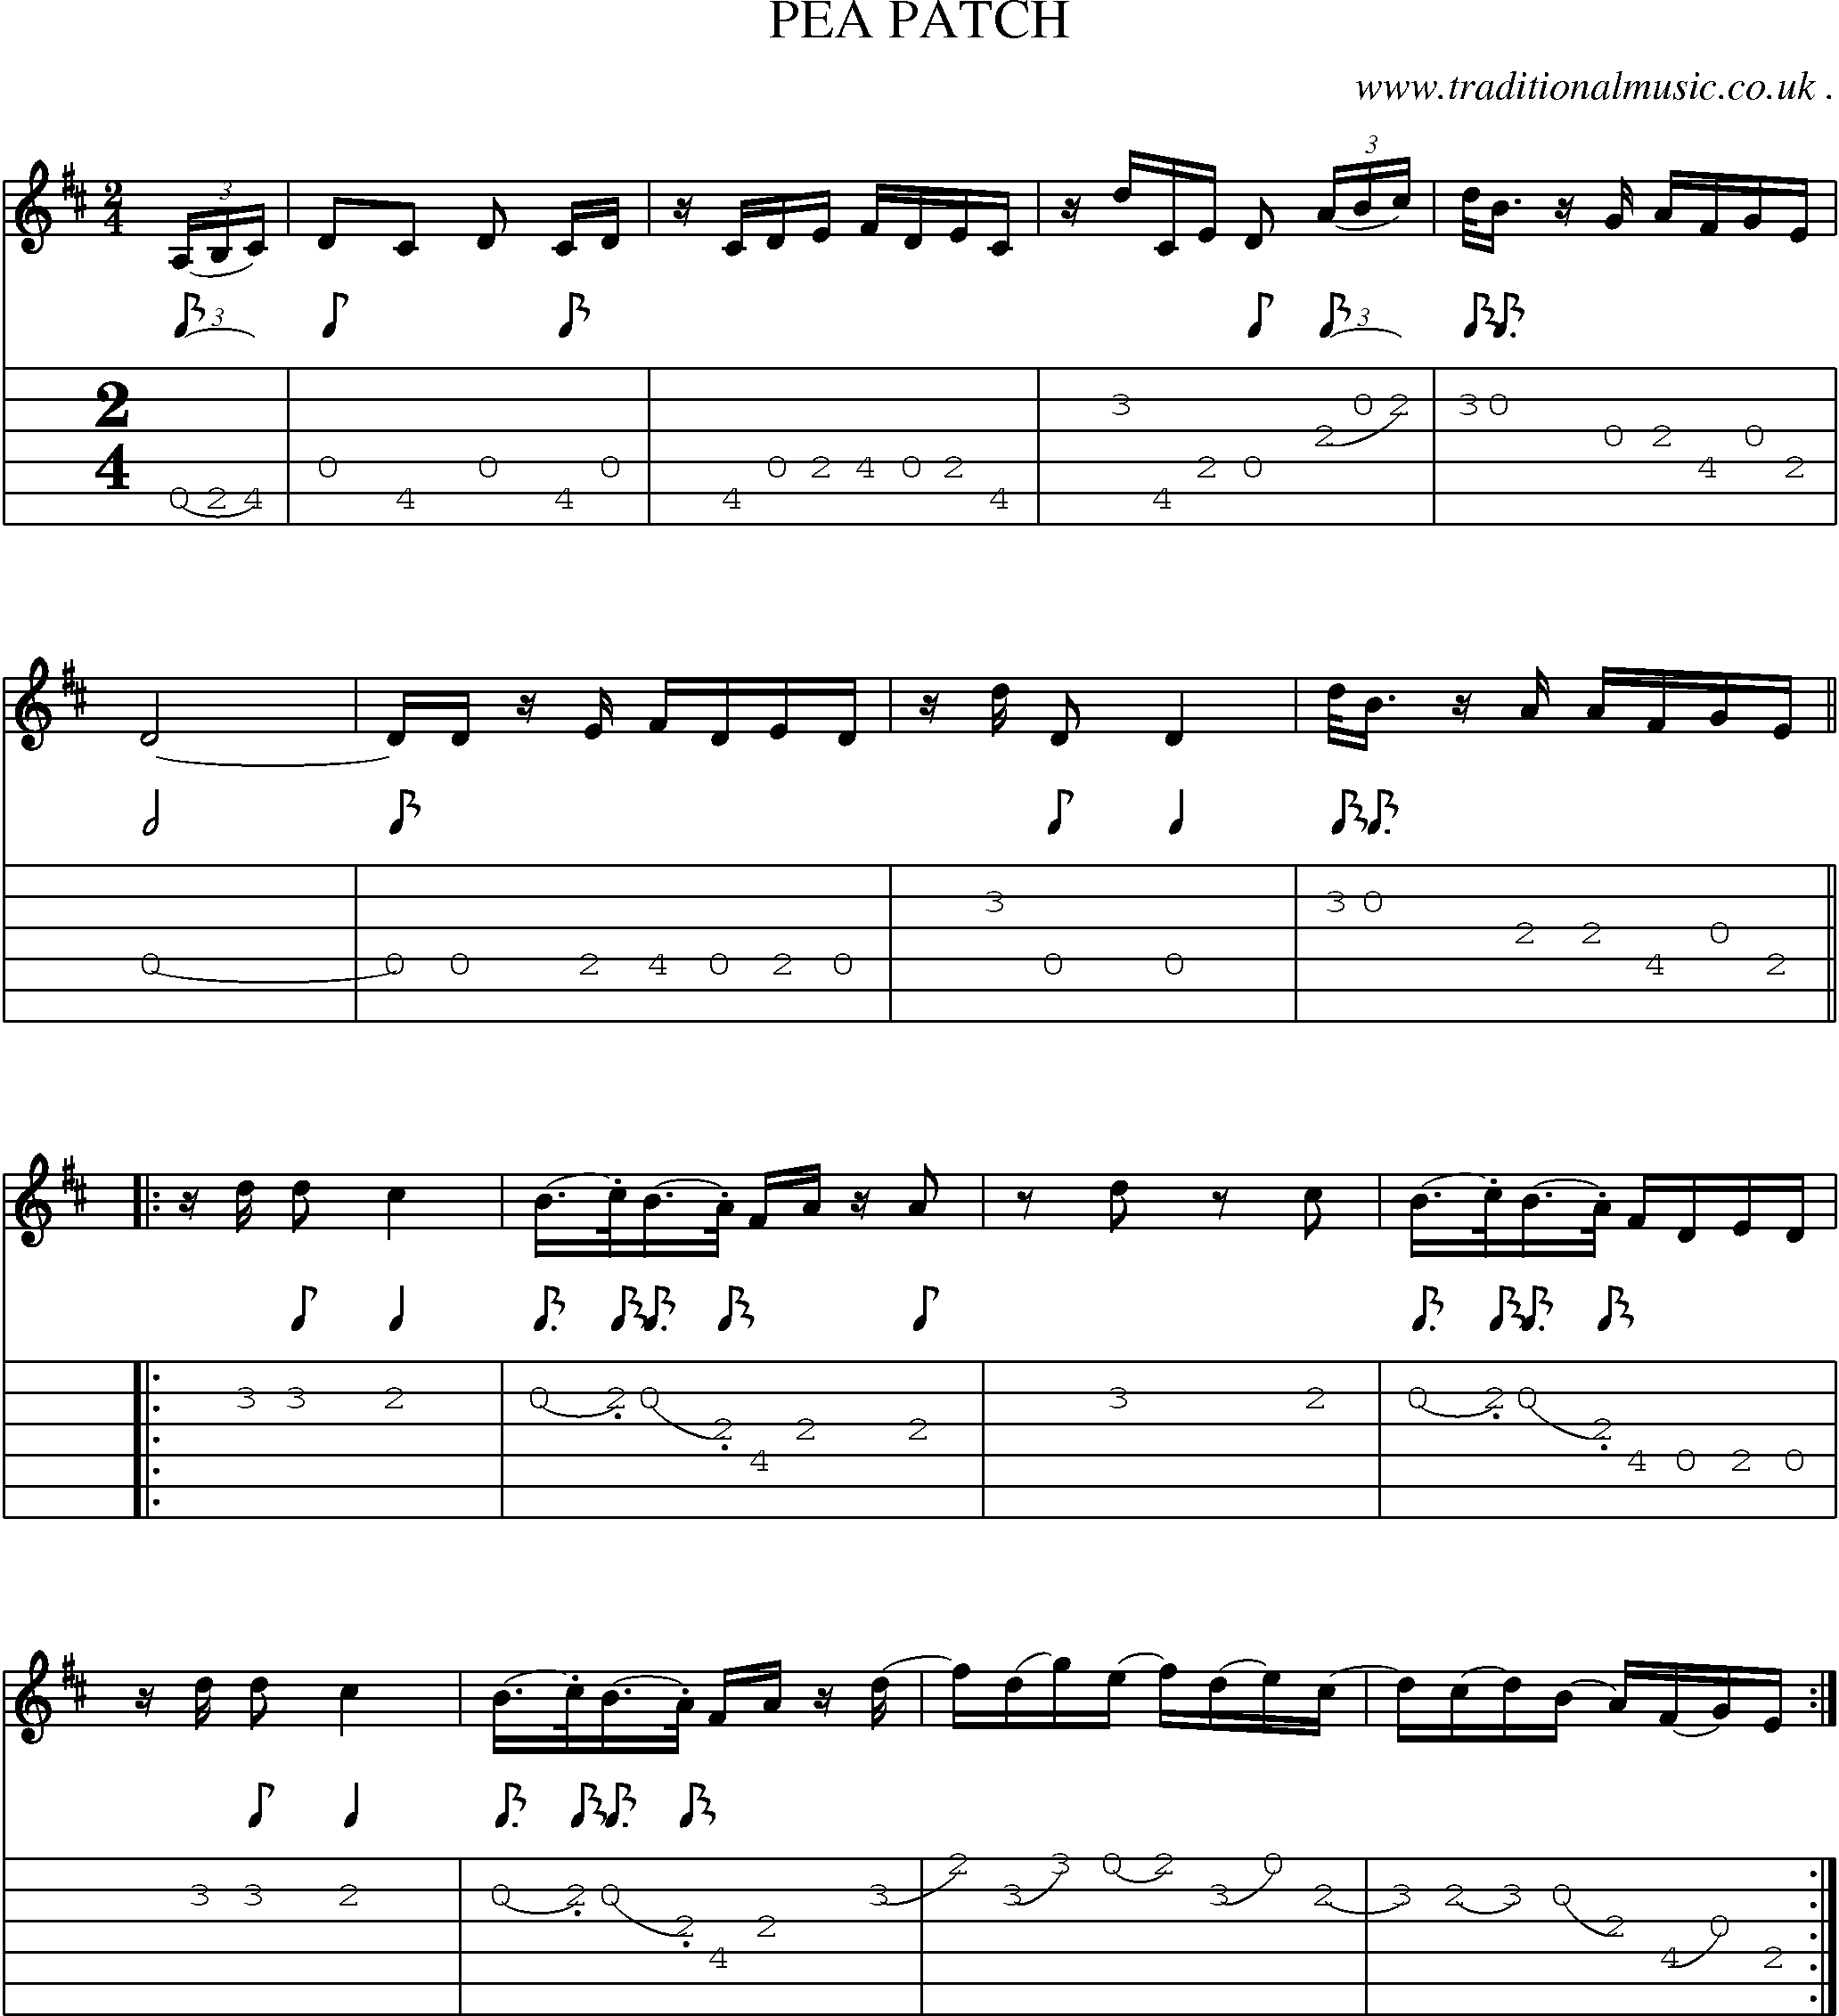 Sheet-Music and Guitar Tabs for Pea Patch